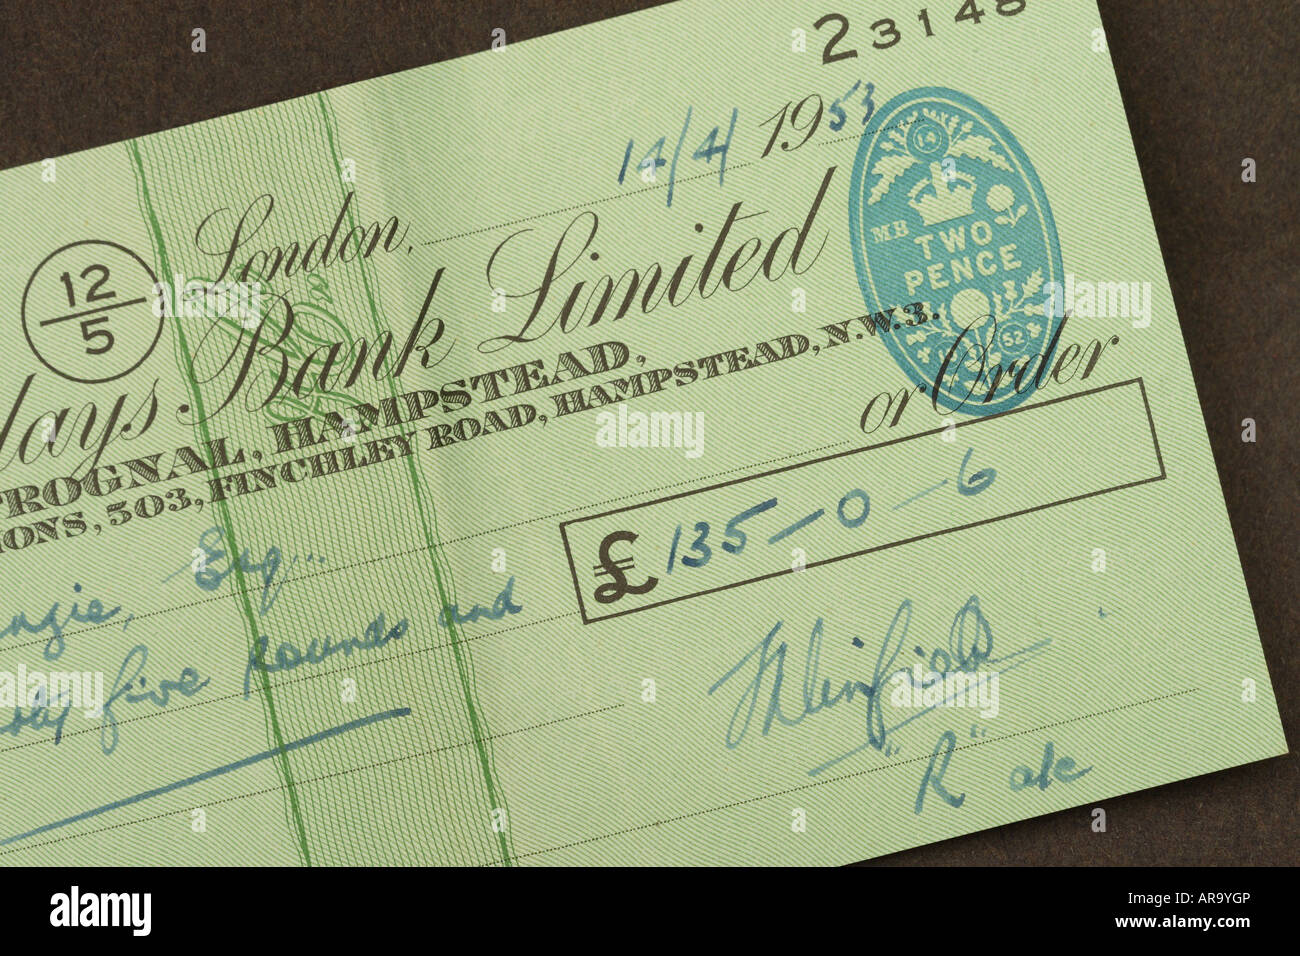 British bank cheque from the 12s showing pounds shilling and